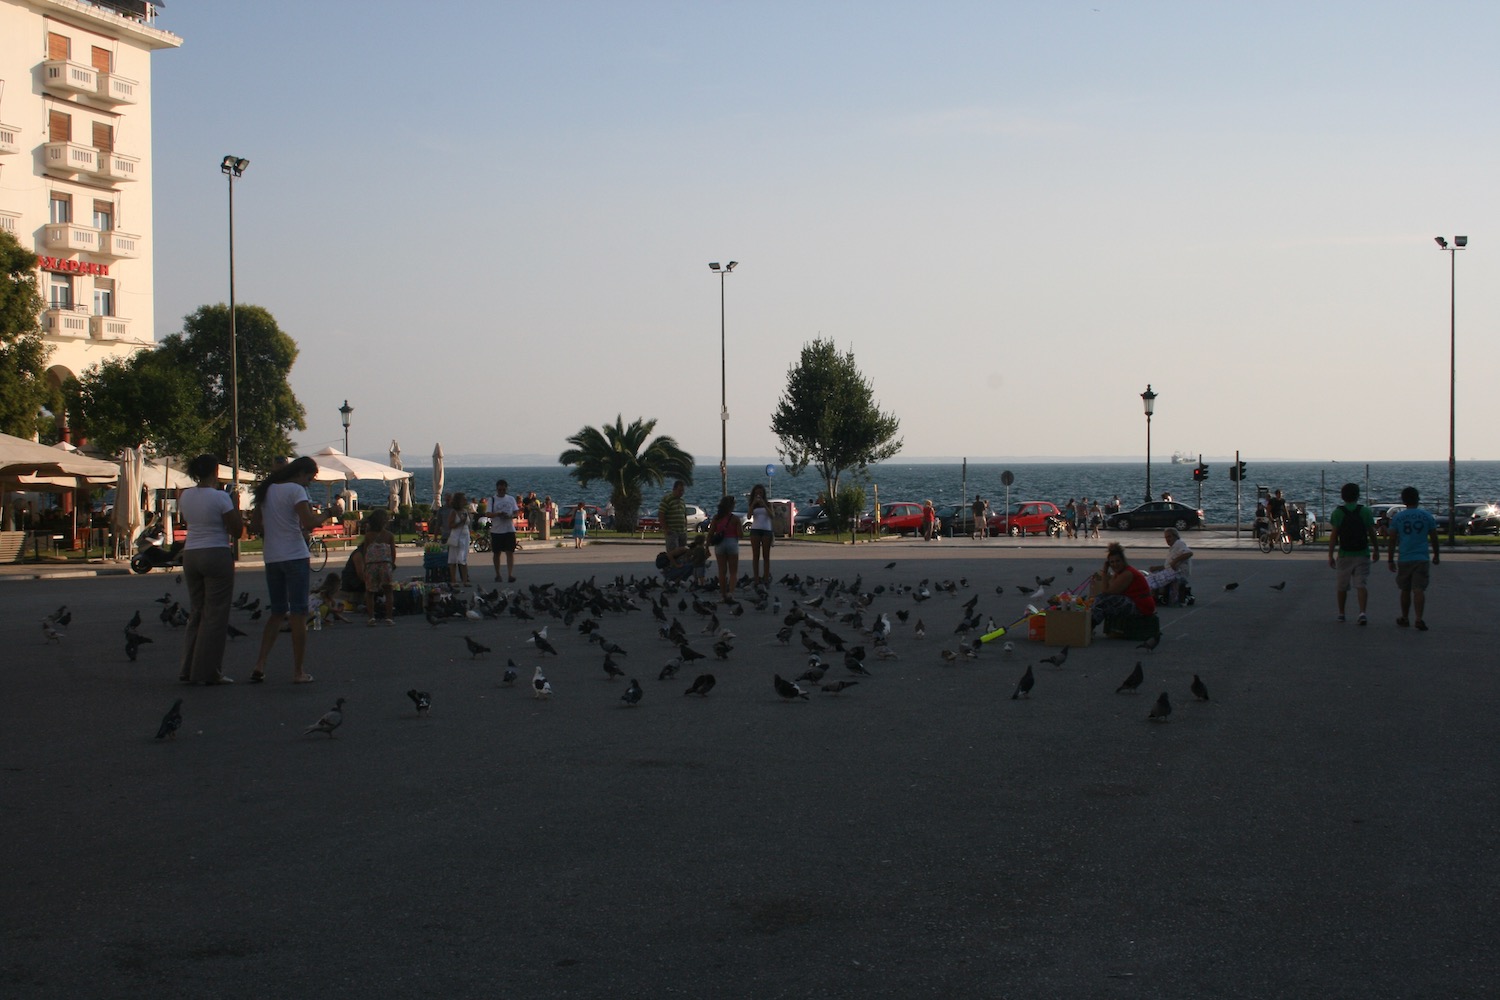 a group of people feeding birds on a street